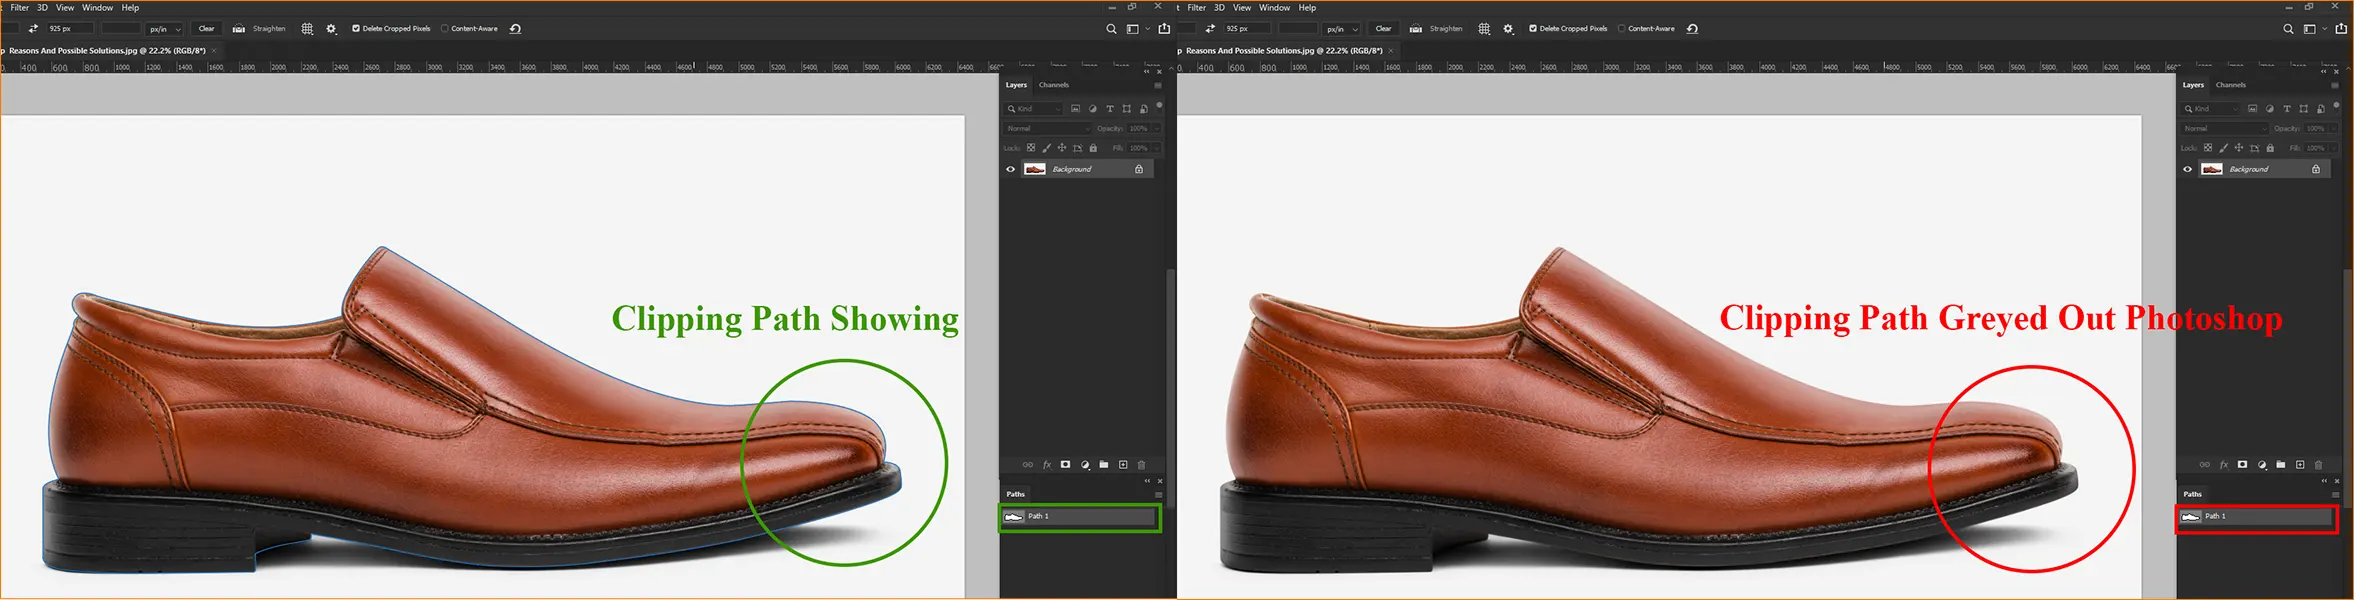 clipping path greyed out photoshop